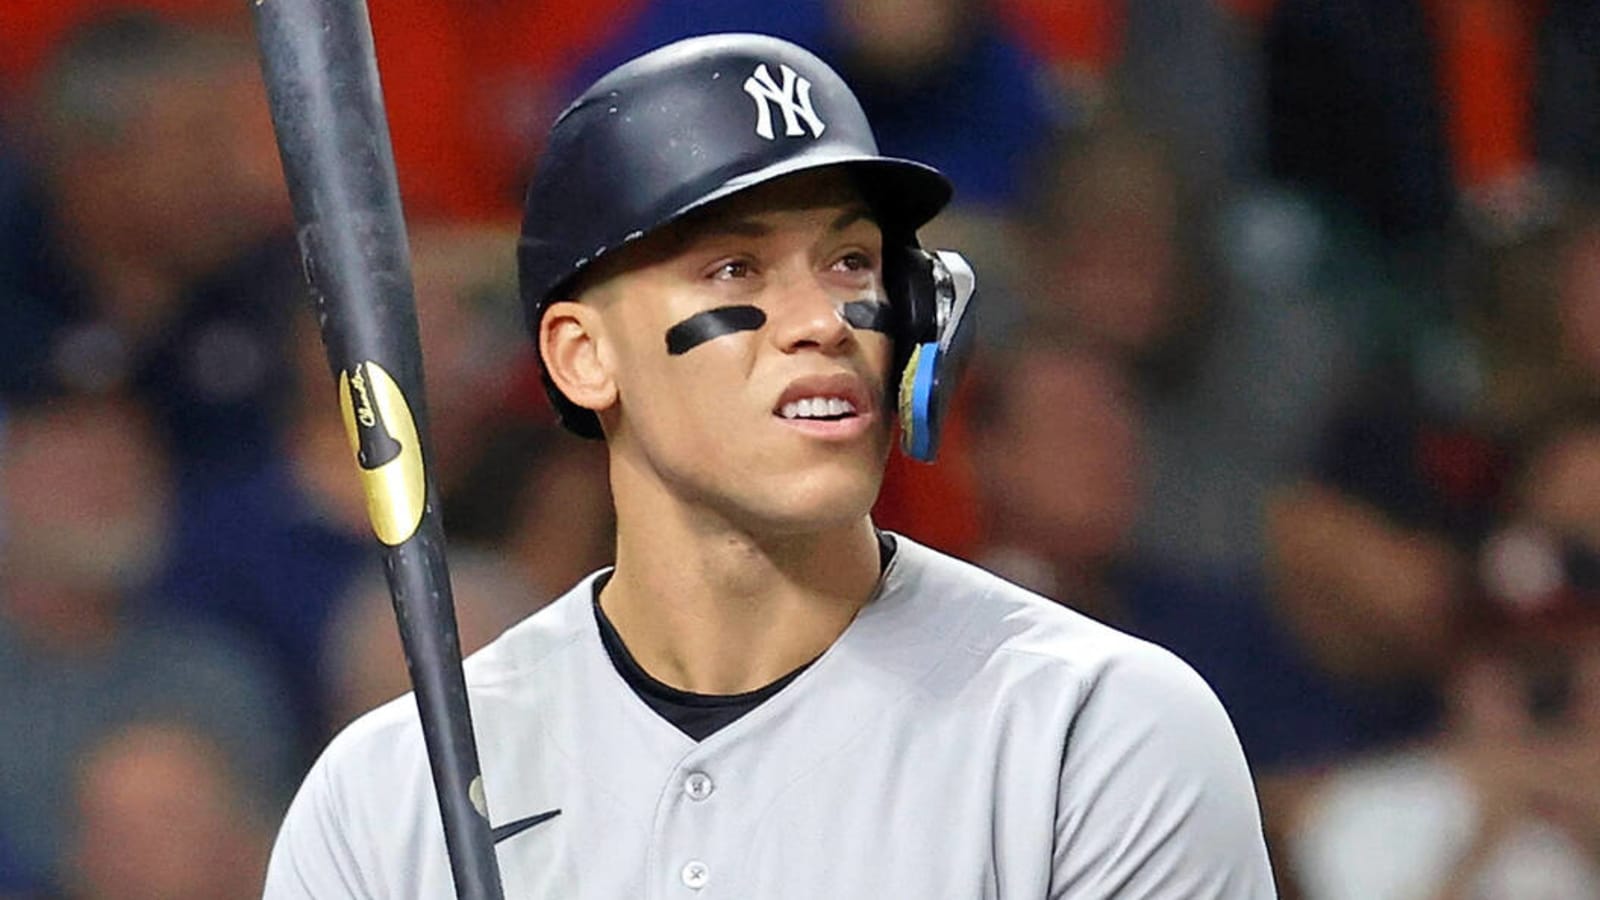 One report suggests Aaron Judge will get nine-year contract